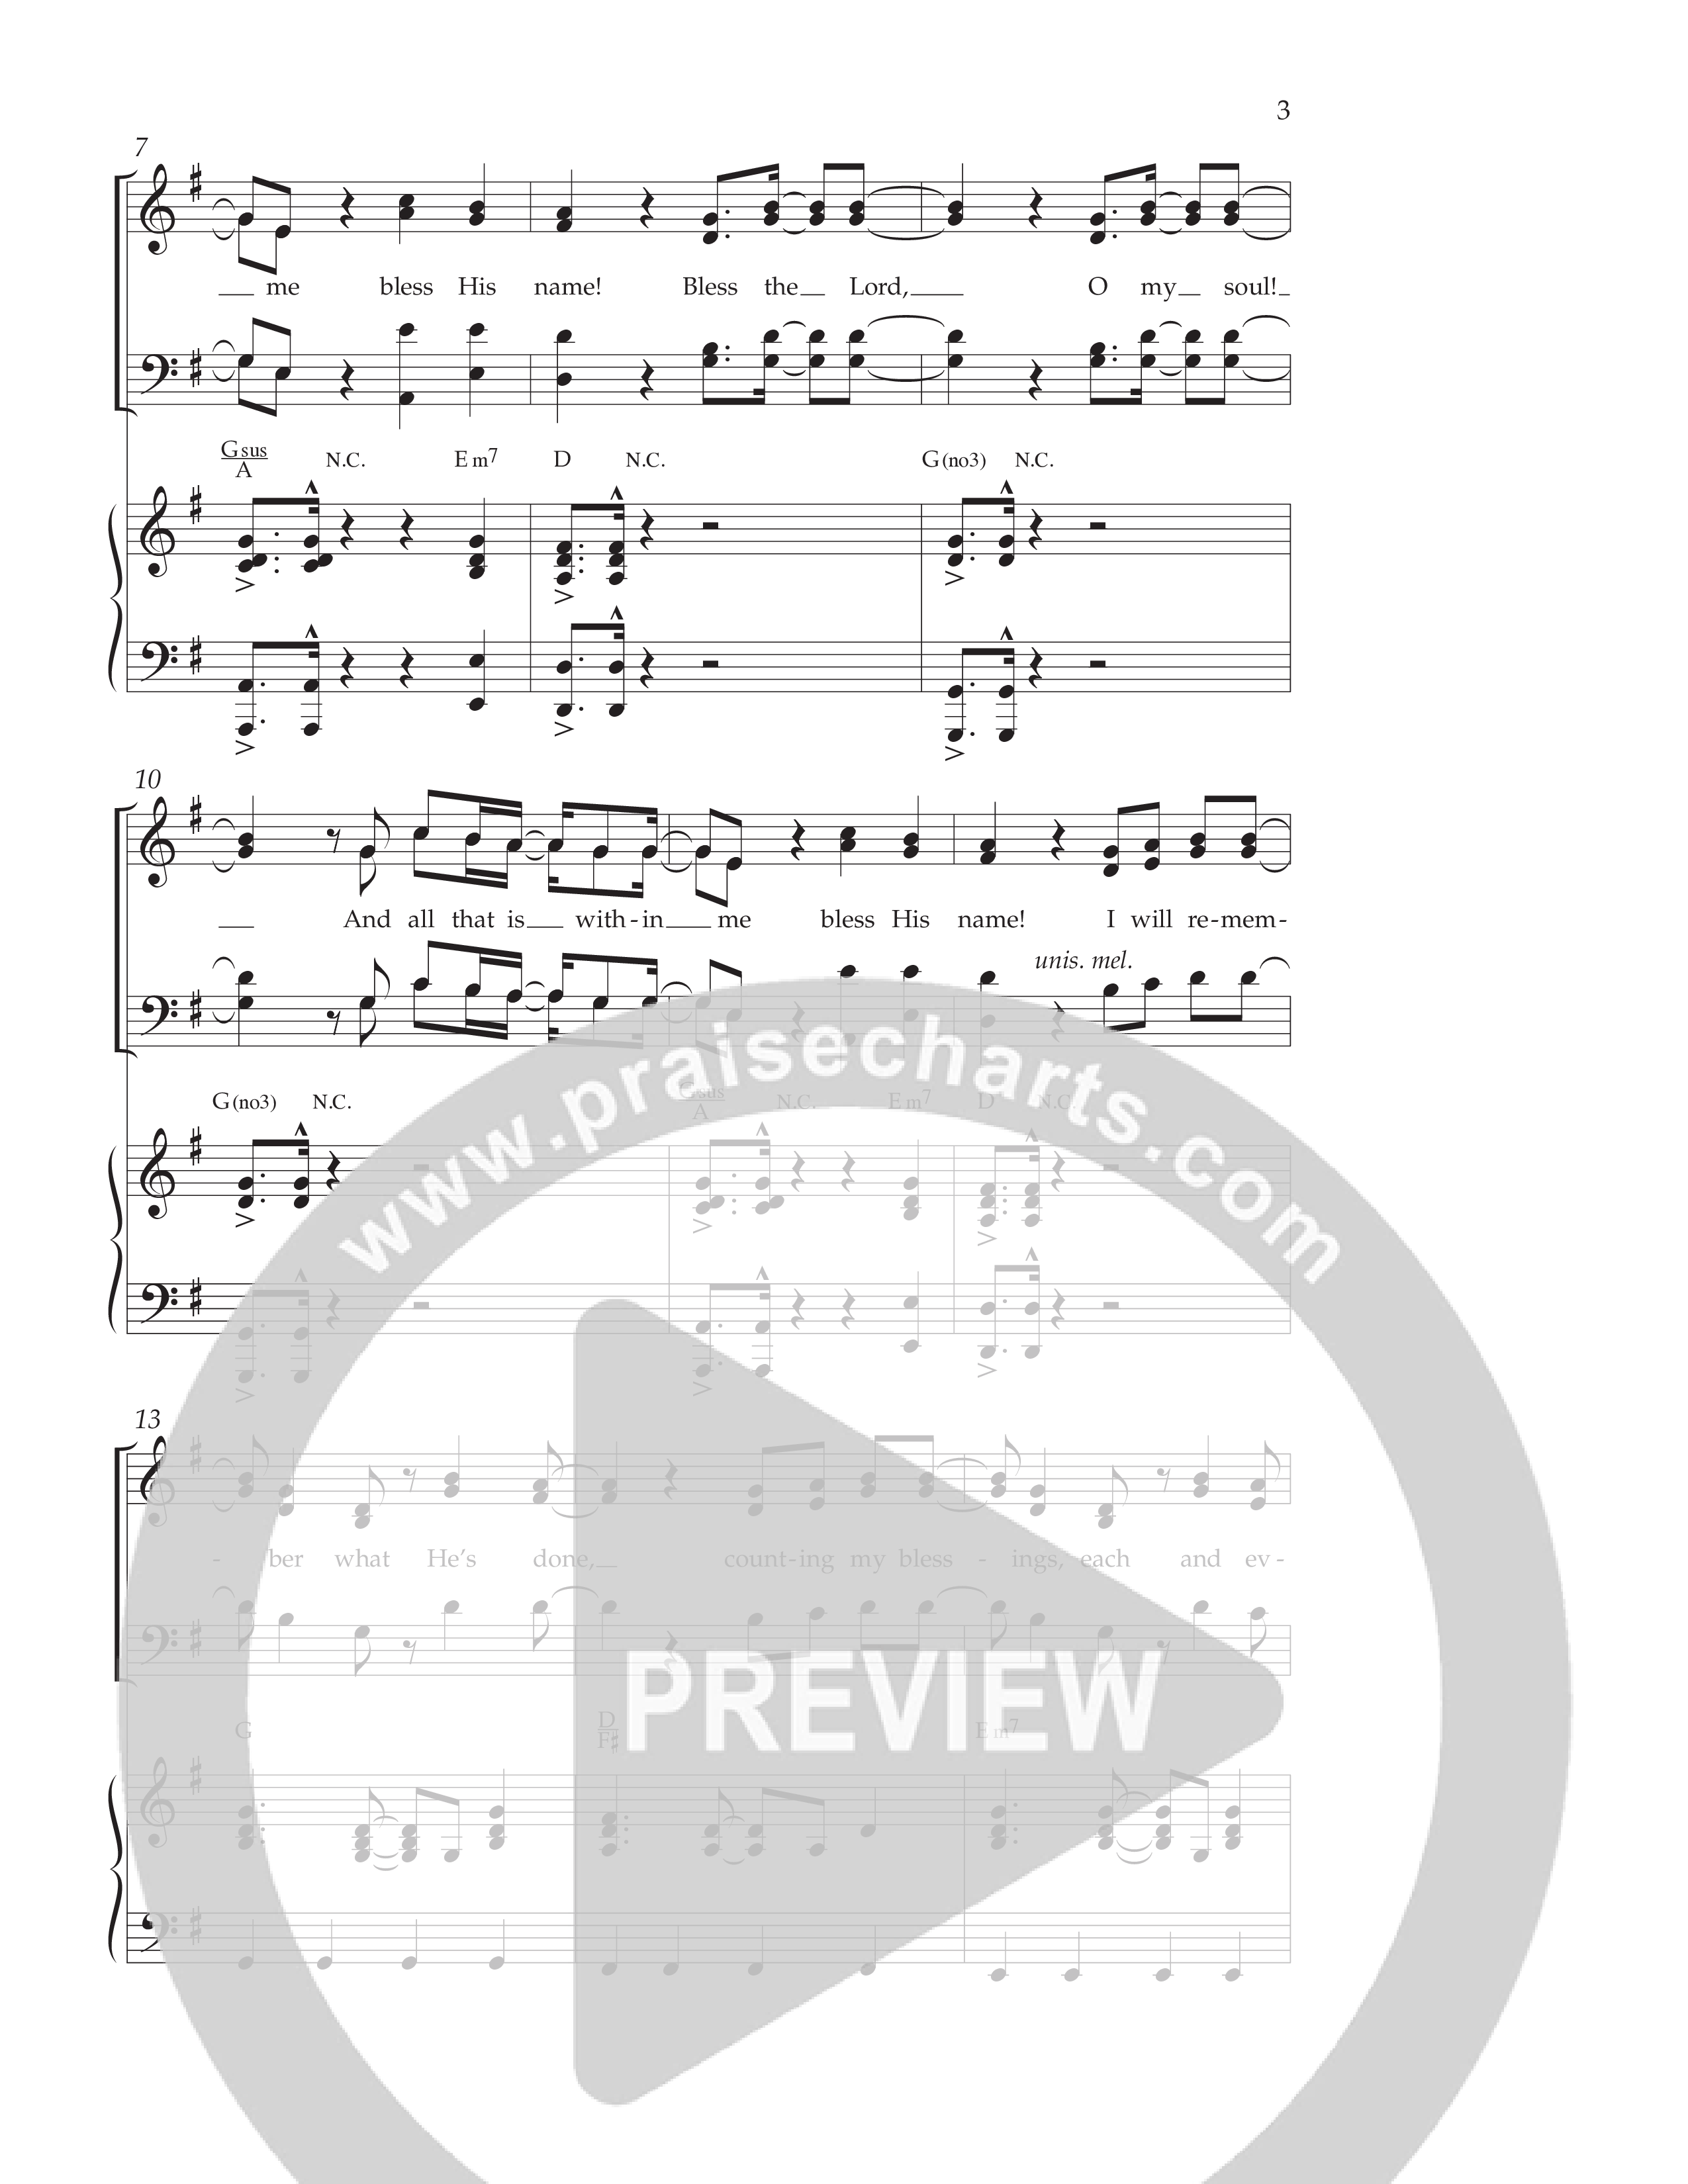 I Will Bless The Lord (Choral Anthem SATB) Anthem (SATB/Piano) (Lifeway Worship / Arr. Cliff Duren)